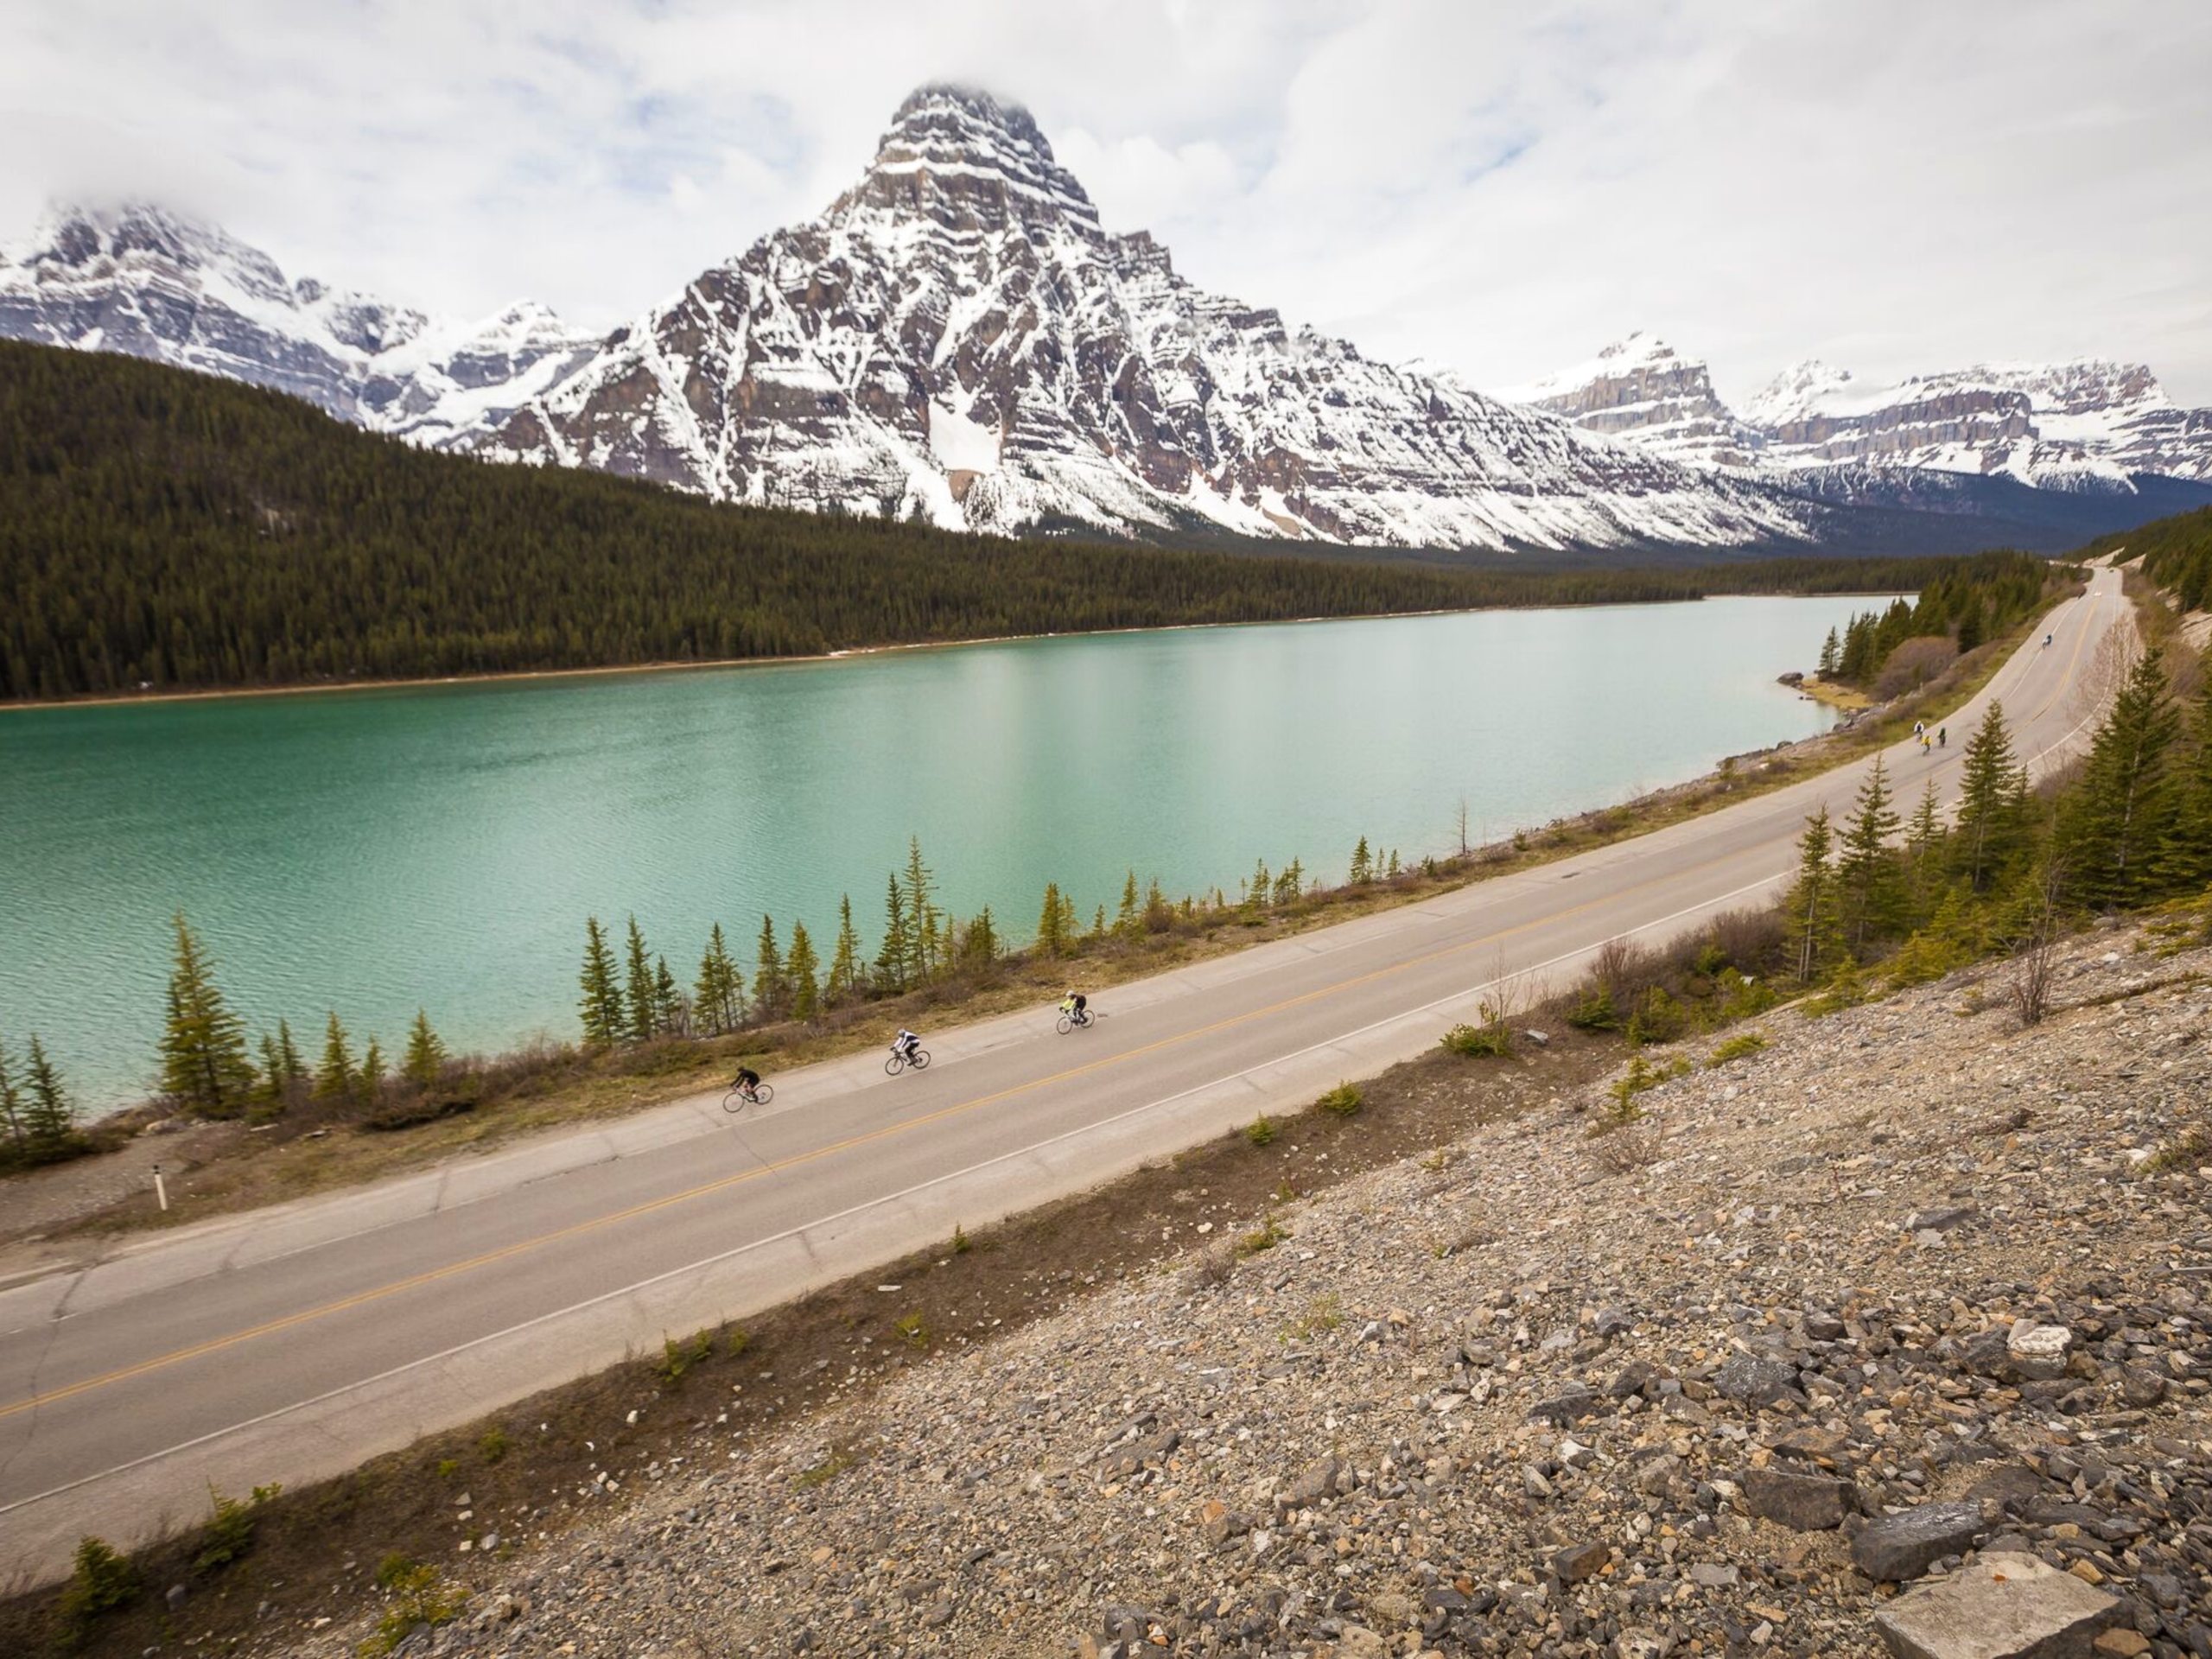 Bikers riding the Icefields Parkway in Alberta, Canada